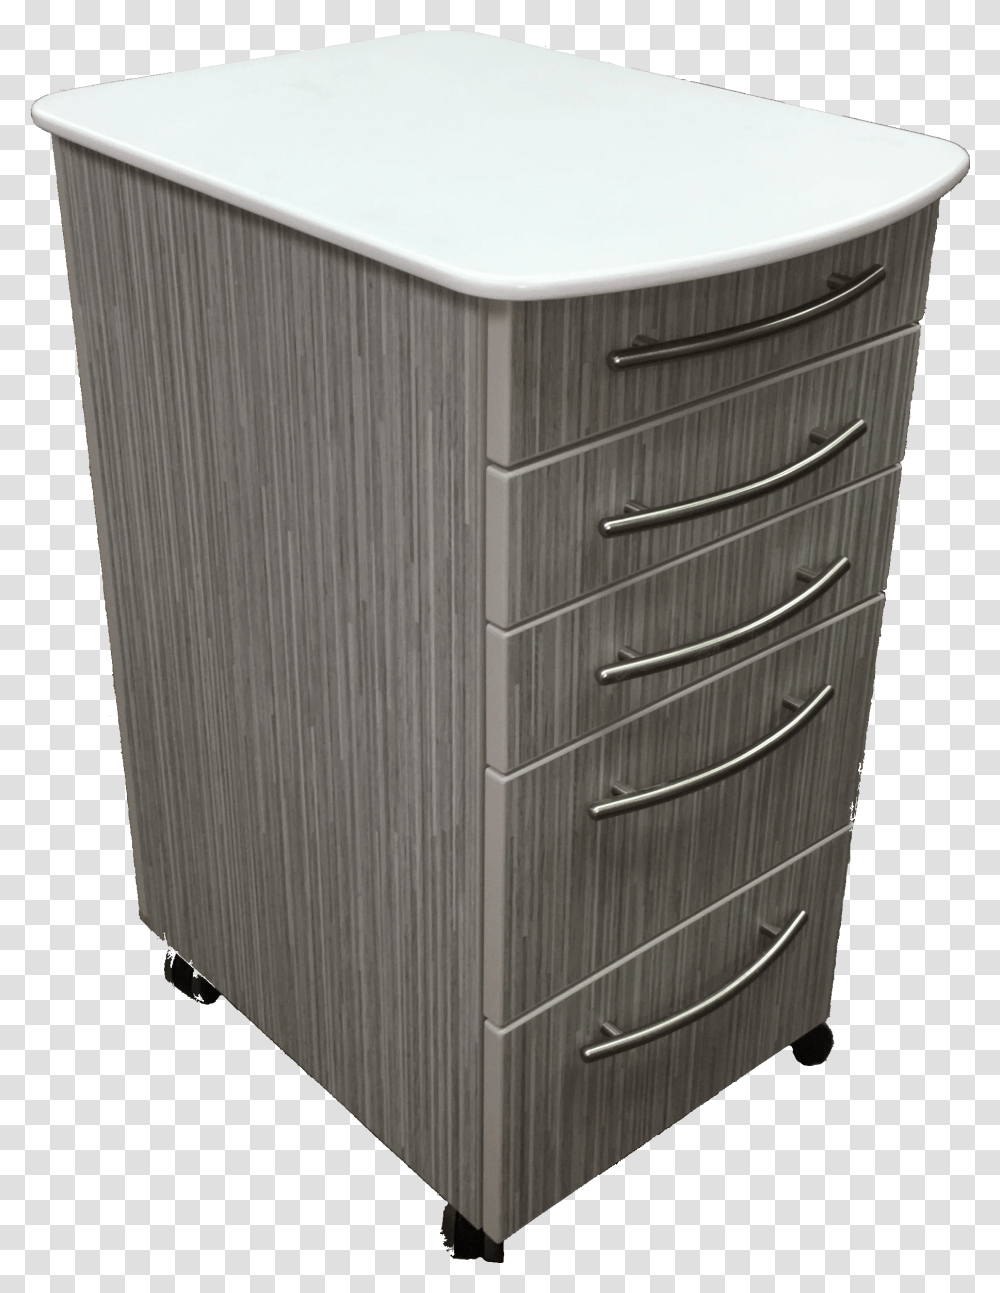 Chest Of Drawers, Furniture, Jacuzzi, Tub, Hot Tub Transparent Png